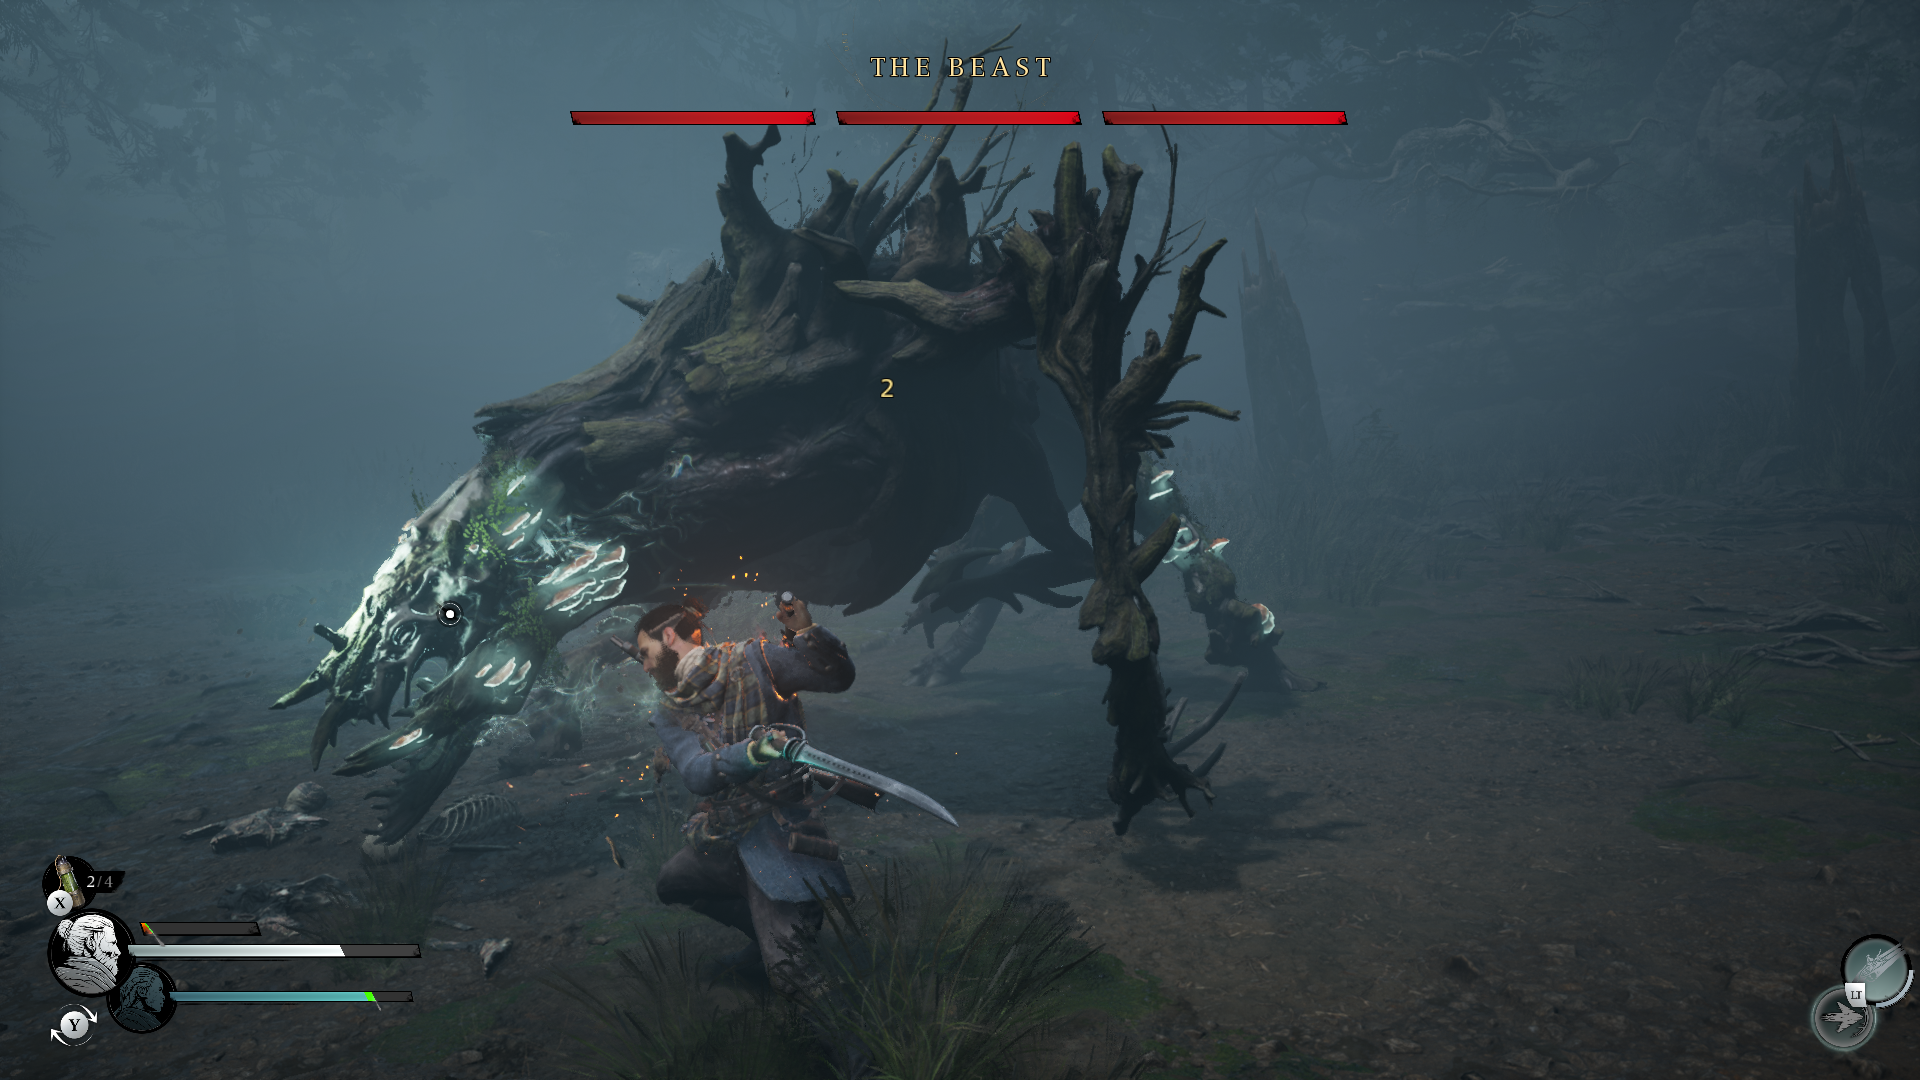 Red fighting a beast made of tangled wood in Banishers: Ghosts of New Eden.